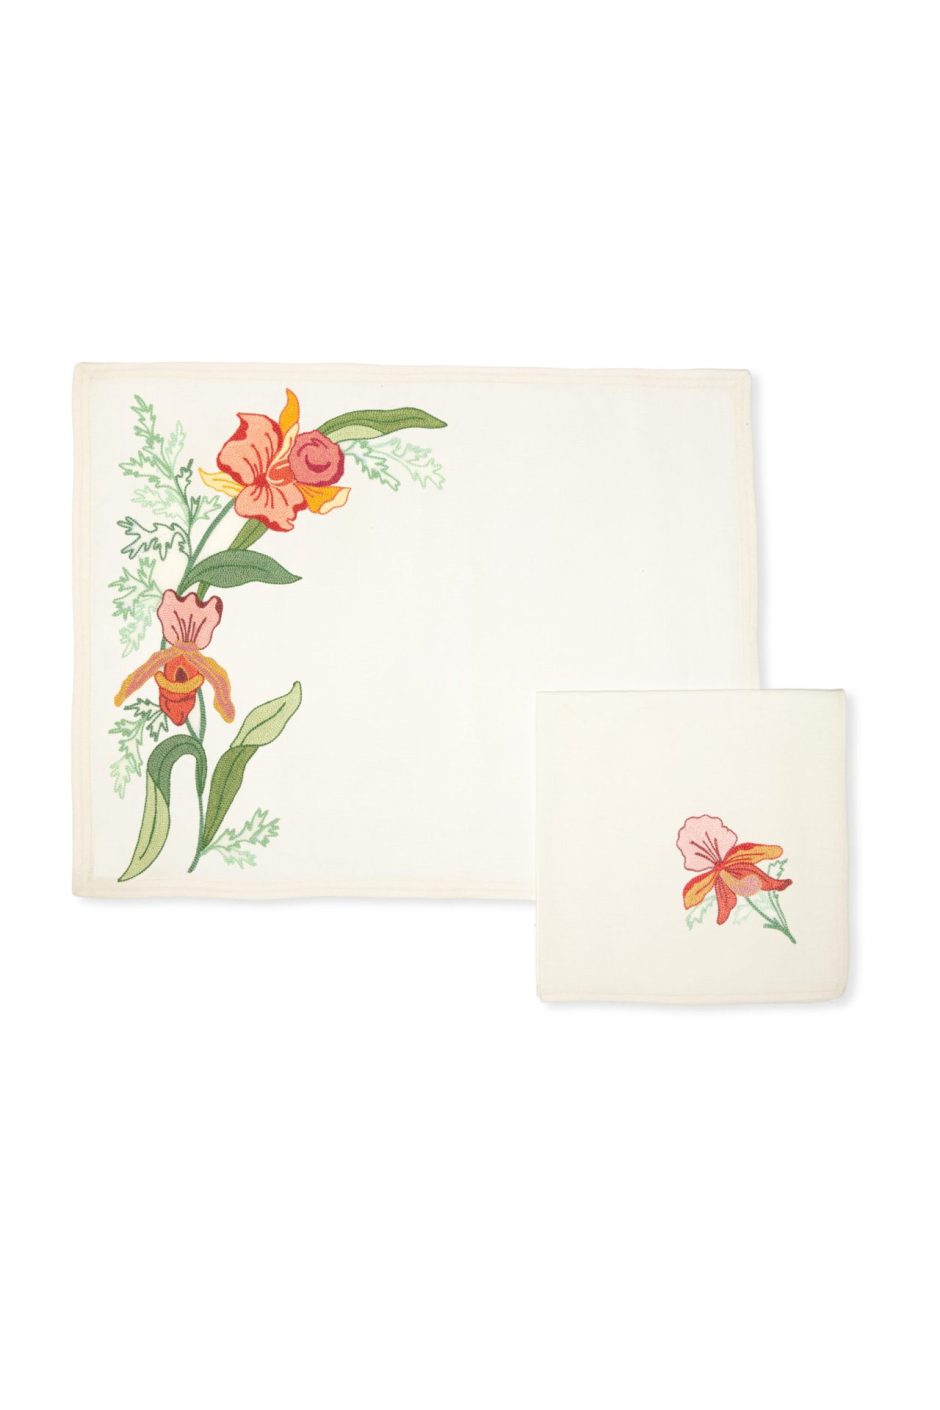 EMBROIDERED ORCHID PLACEMAT SET